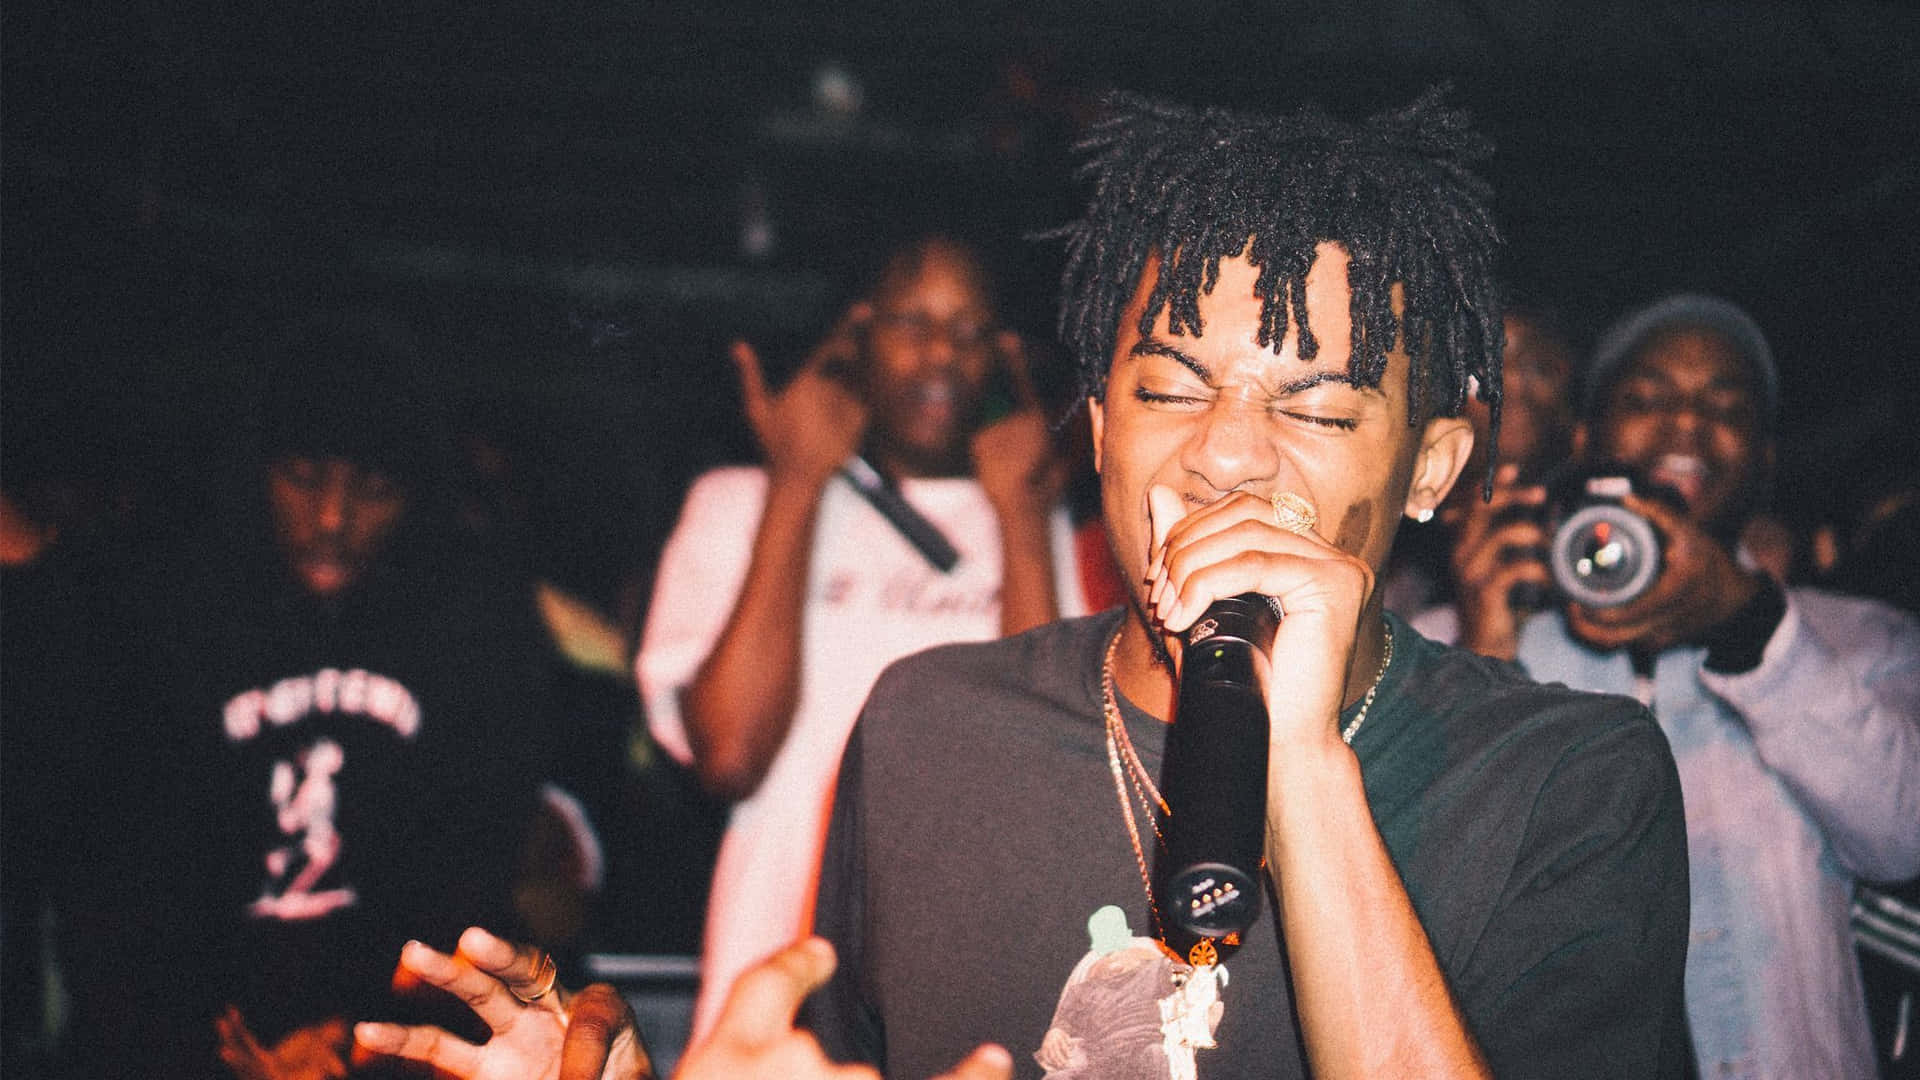 Playboi Carti stands proud as the creator of his critically acclaimed album, PC. Wallpaper